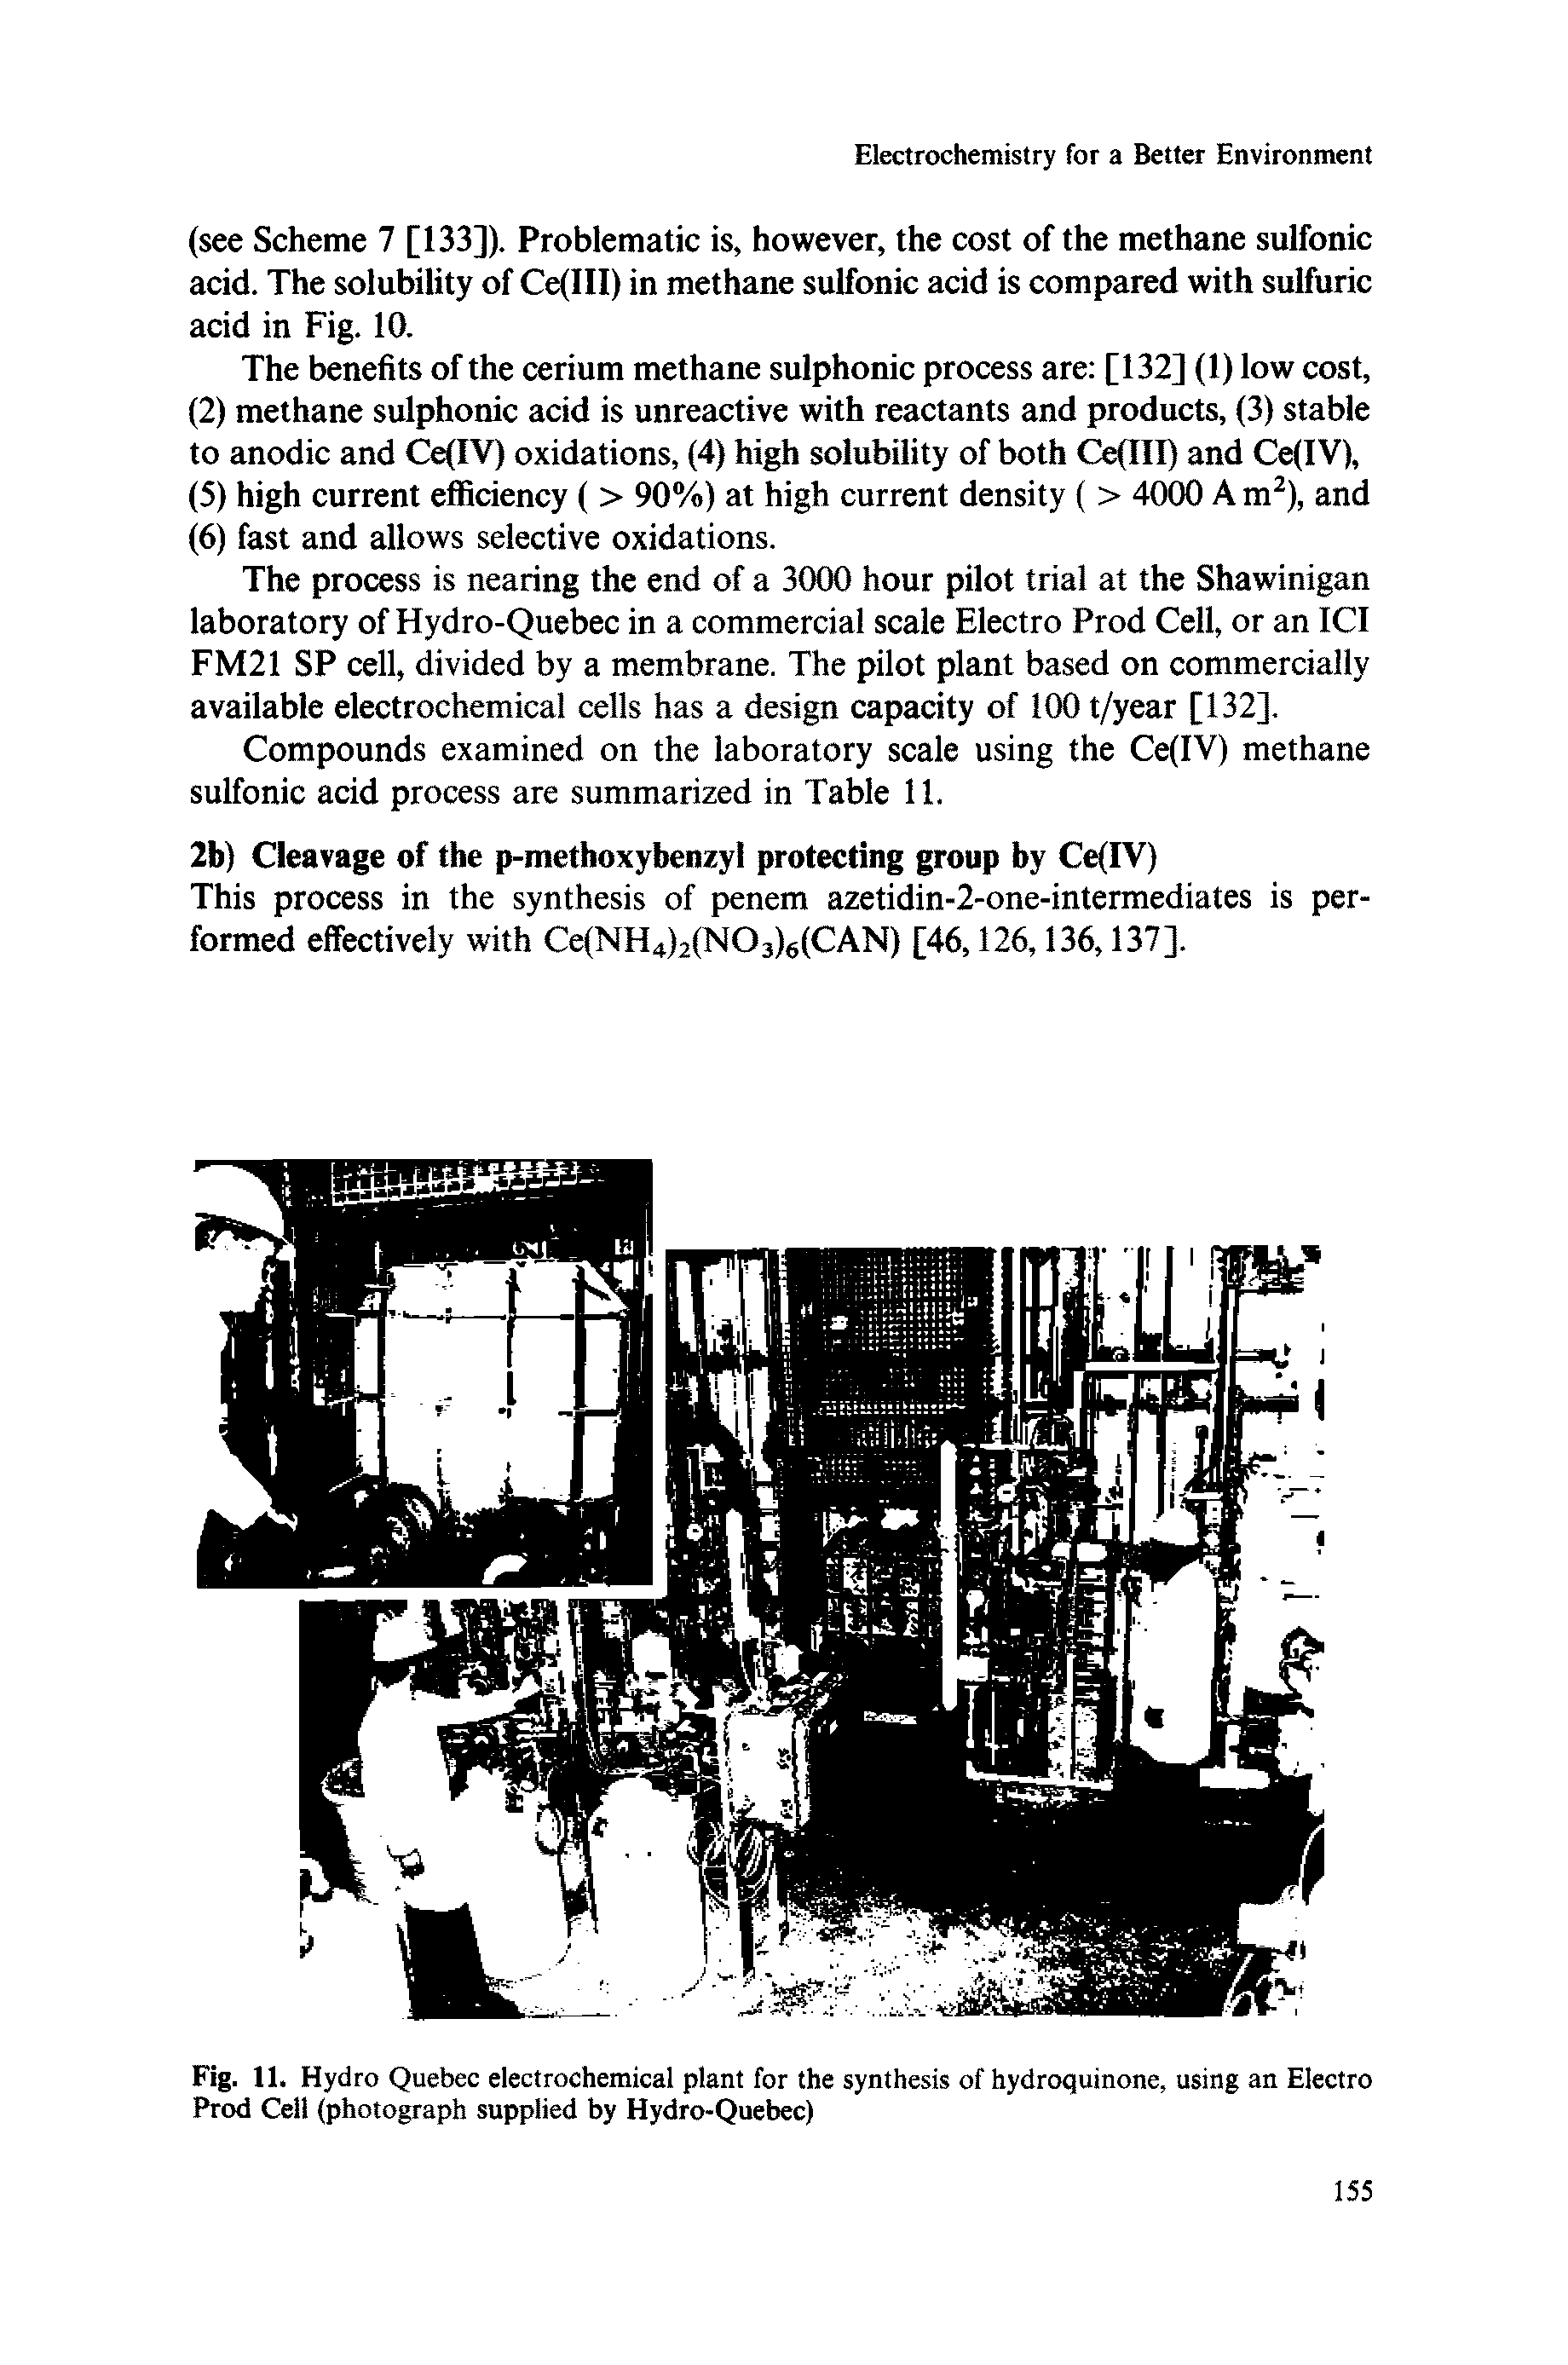 Fig. 11. Hydro Quebec electrochemical plant for the synthesis of hydroquinone, using an Electro Prod Cell (photograph supplied by Hydro-Quebec)...